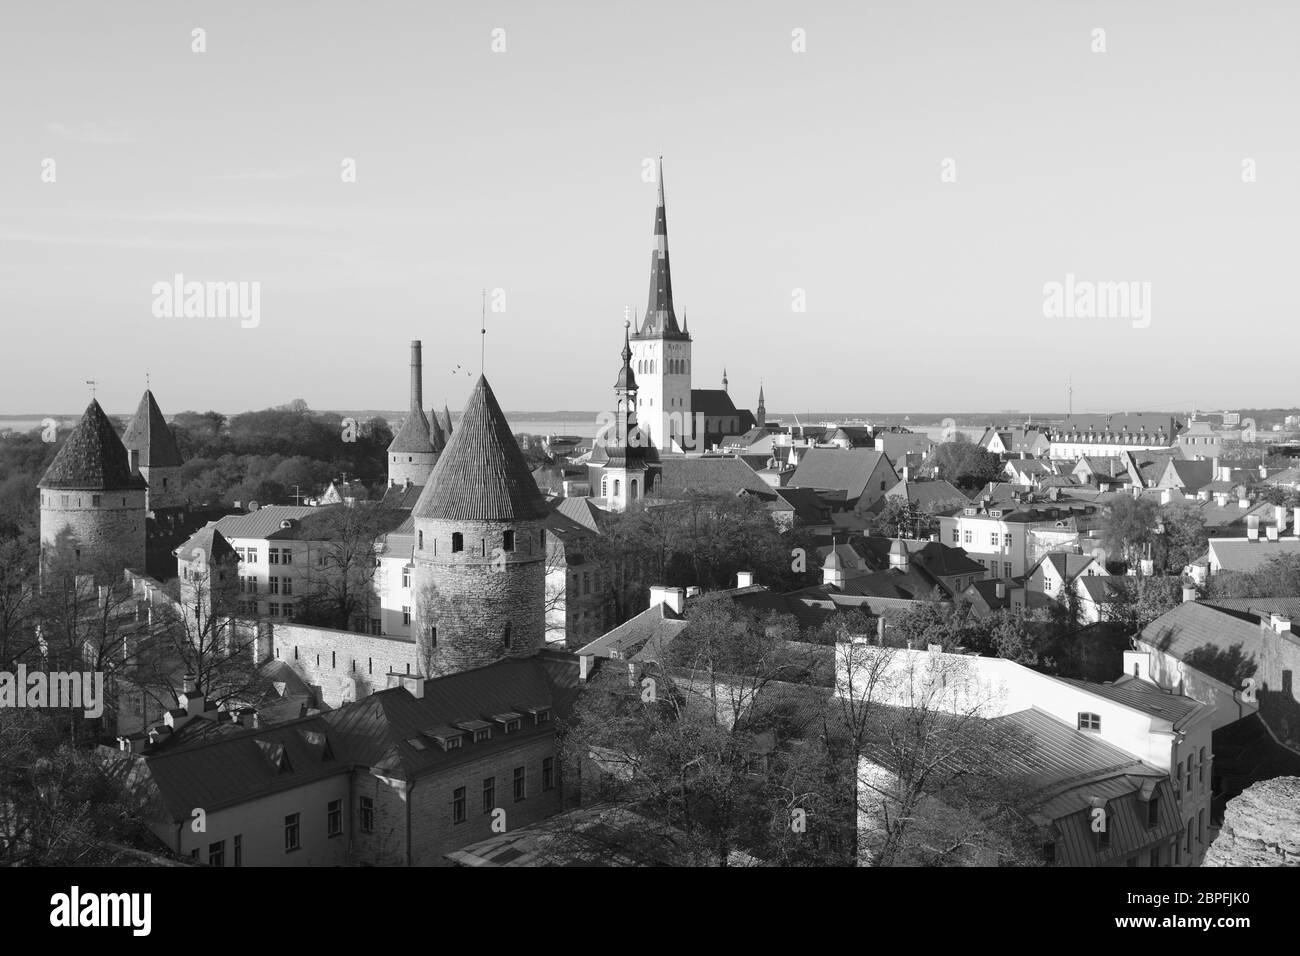 Cityscape of Tallinn, Estonia - a UNESCO World Heritage site - fortifications in the medieval city wall and church towers rise above the houses - mono Stock Photo